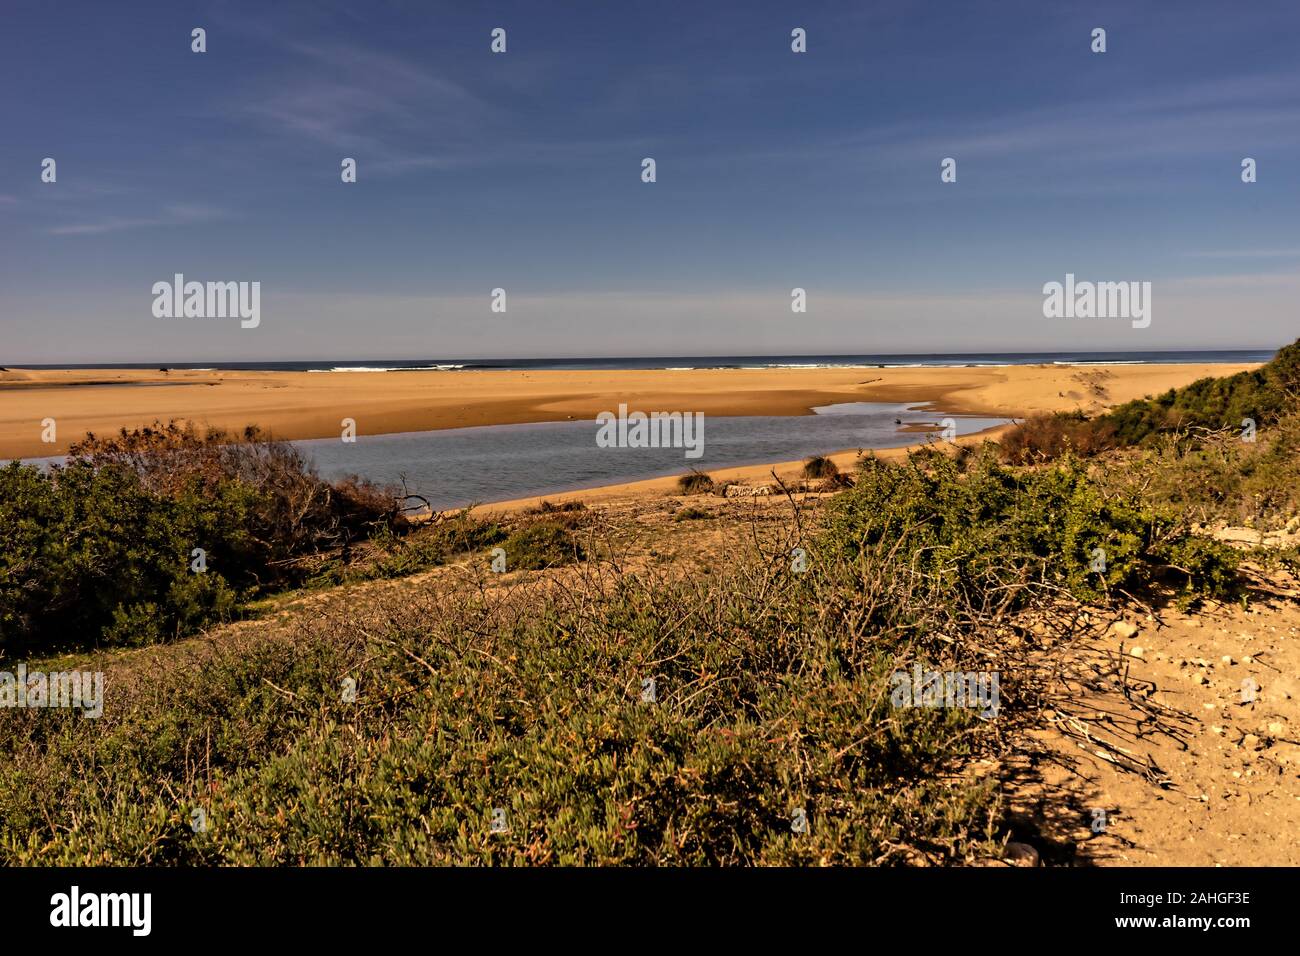 Massa River High Resolution Stock Photography and Images - Alamy